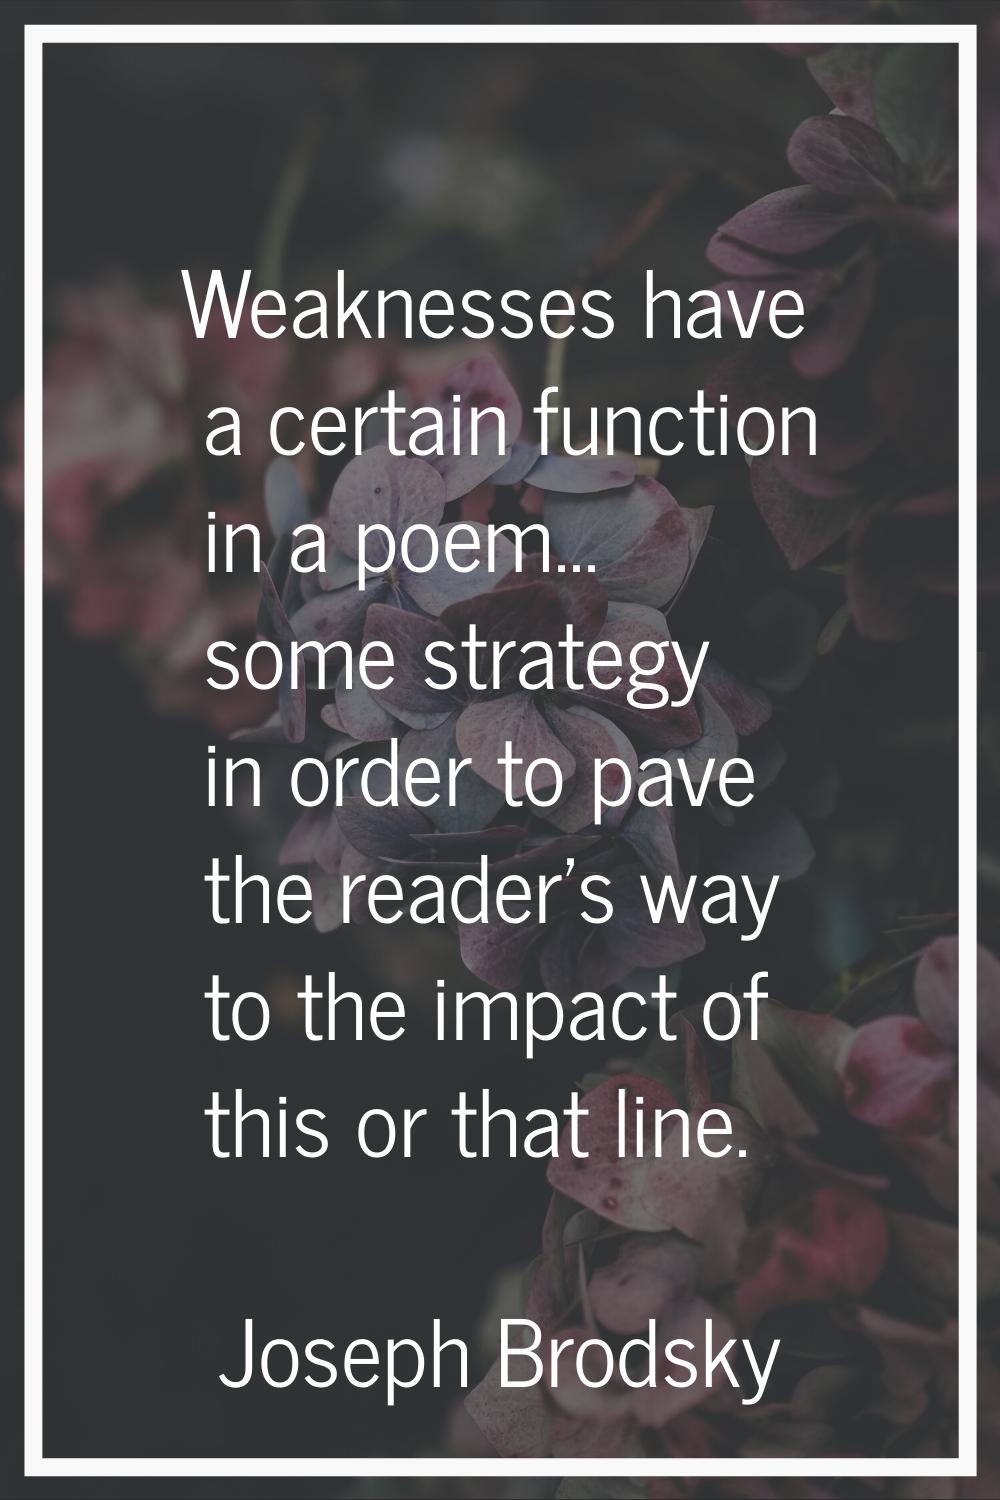 Weaknesses have a certain function in a poem... some strategy in order to pave the reader's way to 